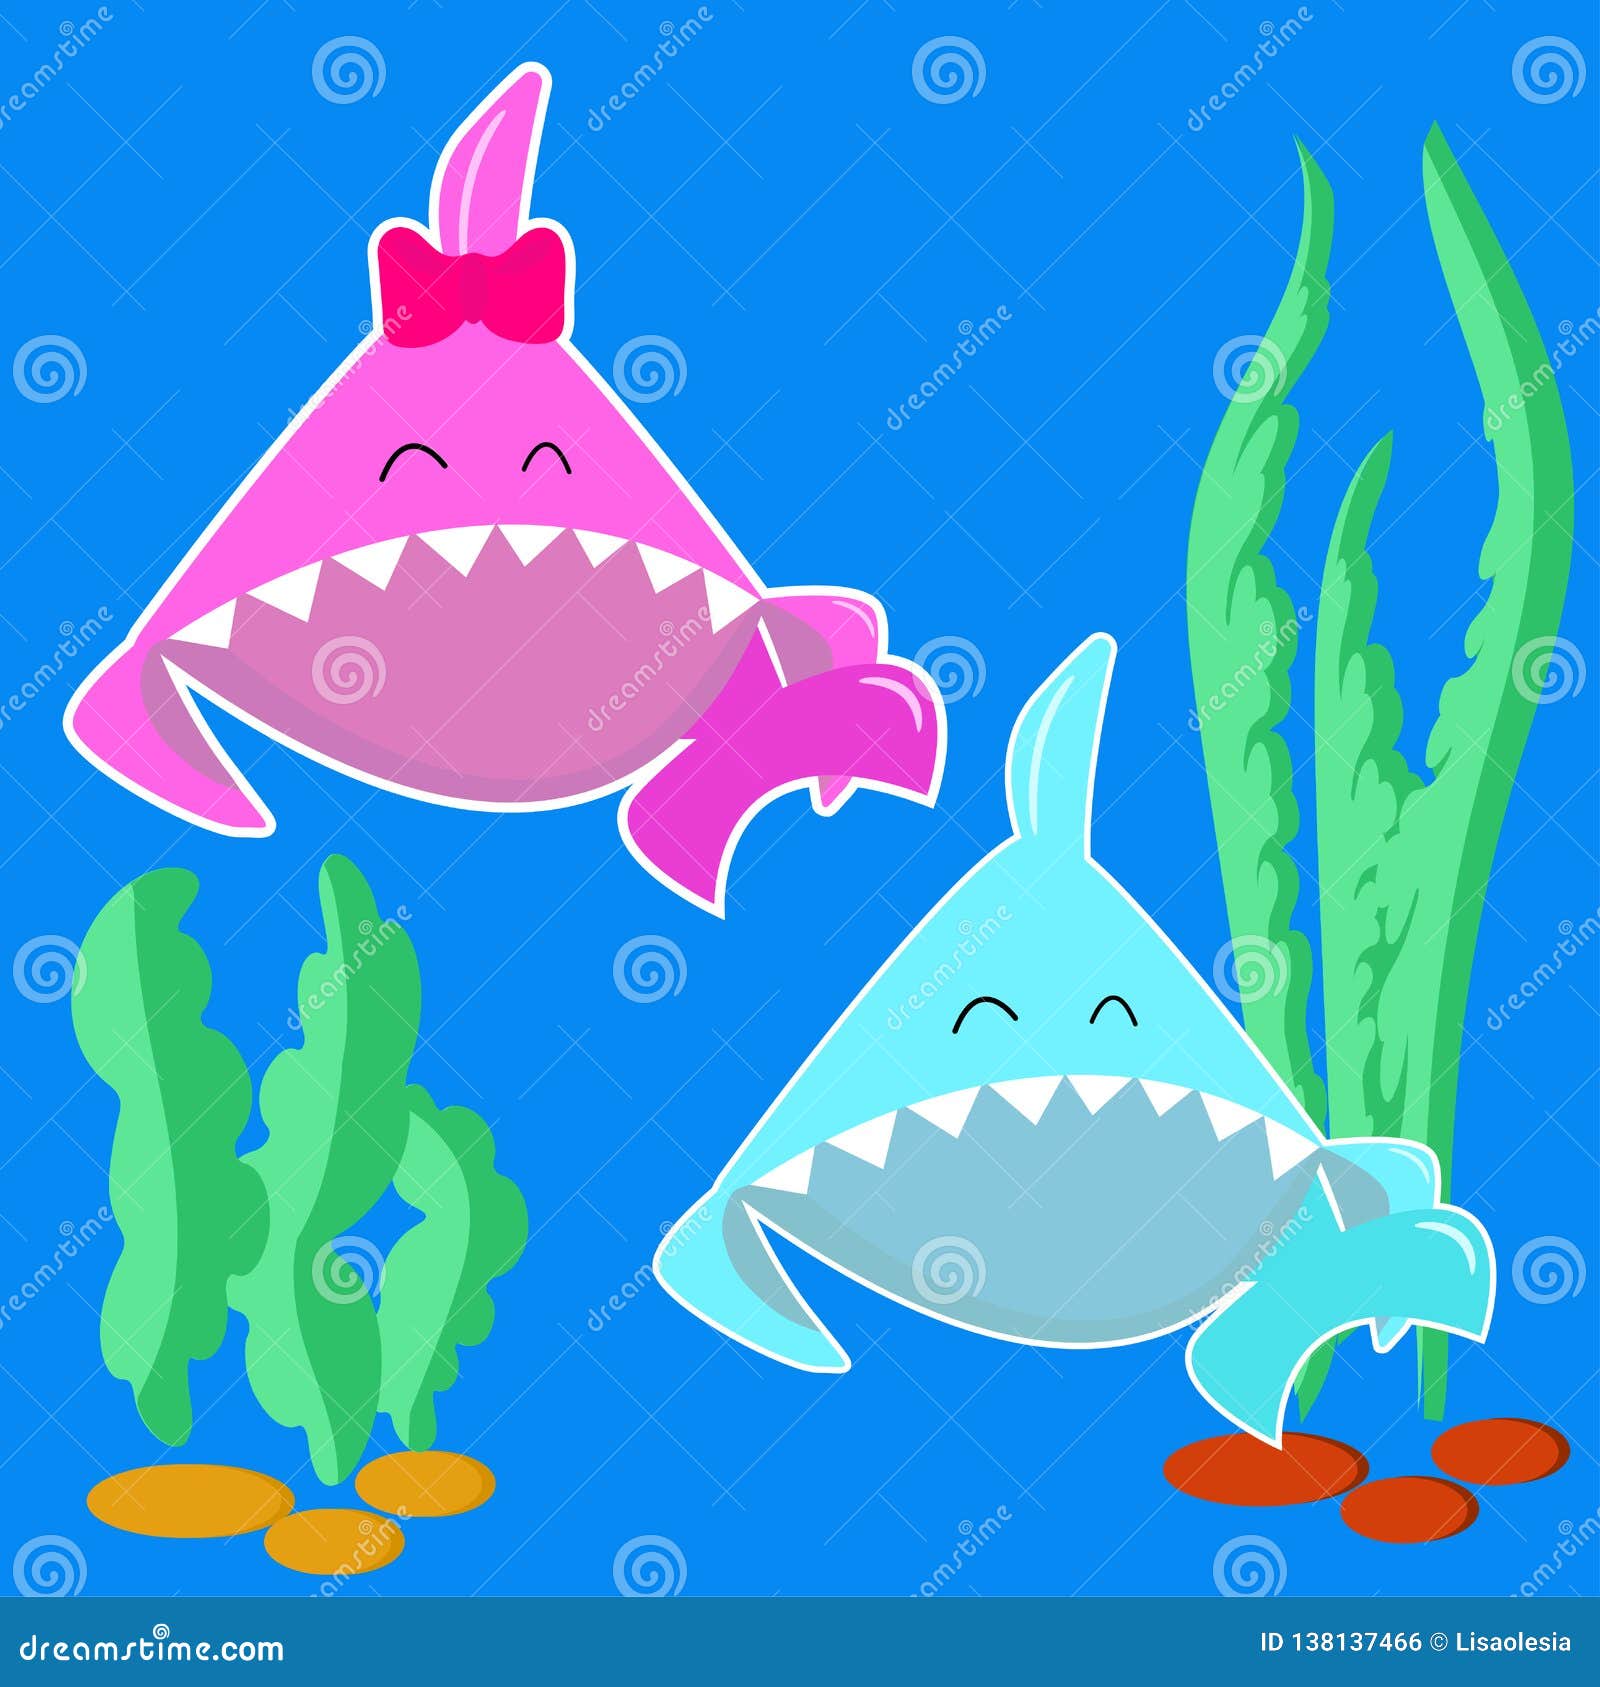 Blue Baby Shark Boy and Pink Baby Shark Girl. Cartoon Fish Character  Isolated on Light Background. Stiker for Kid Party in Marine Stock Vector -  Illustration of cartoon, birthday: 138137466